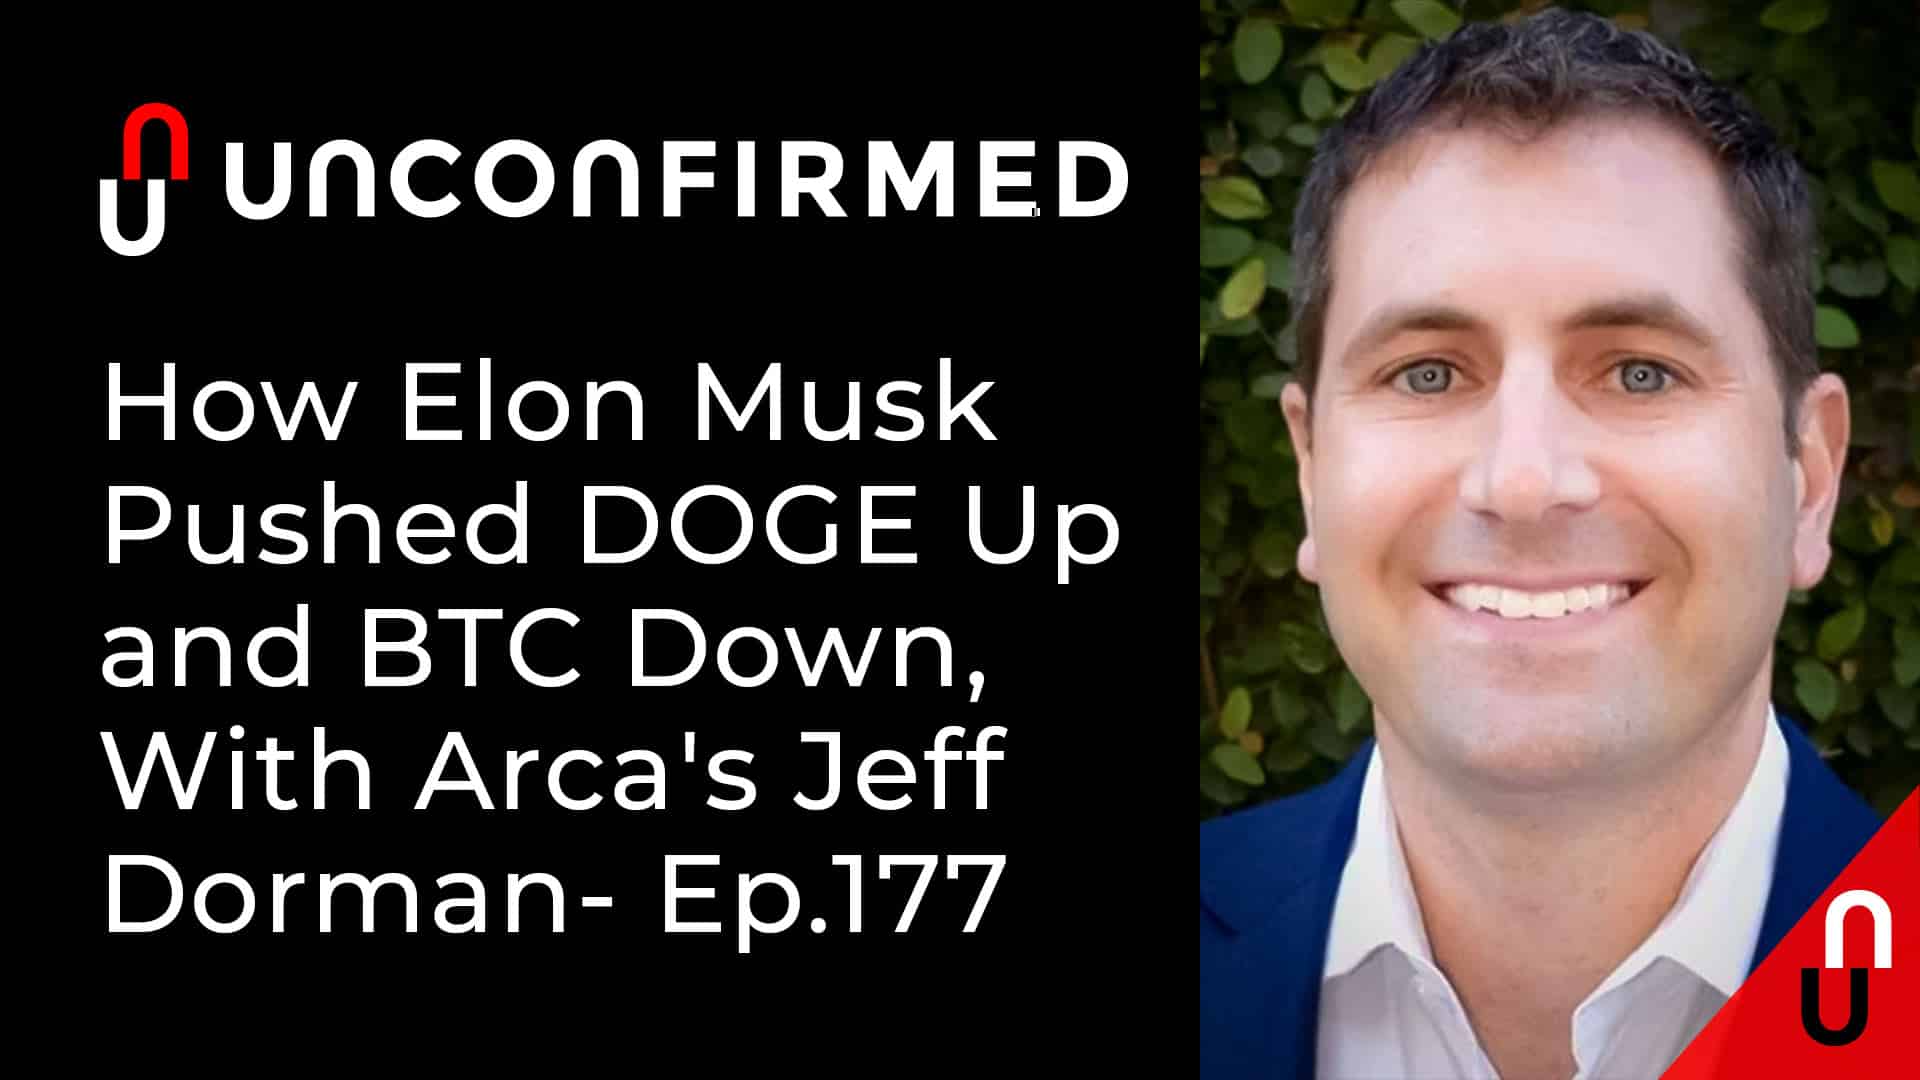 Unconfirmed - Ep.177 - How Elon Musk Pushed DOGE Up and BTC Down - With Arcas Jeff Dorman